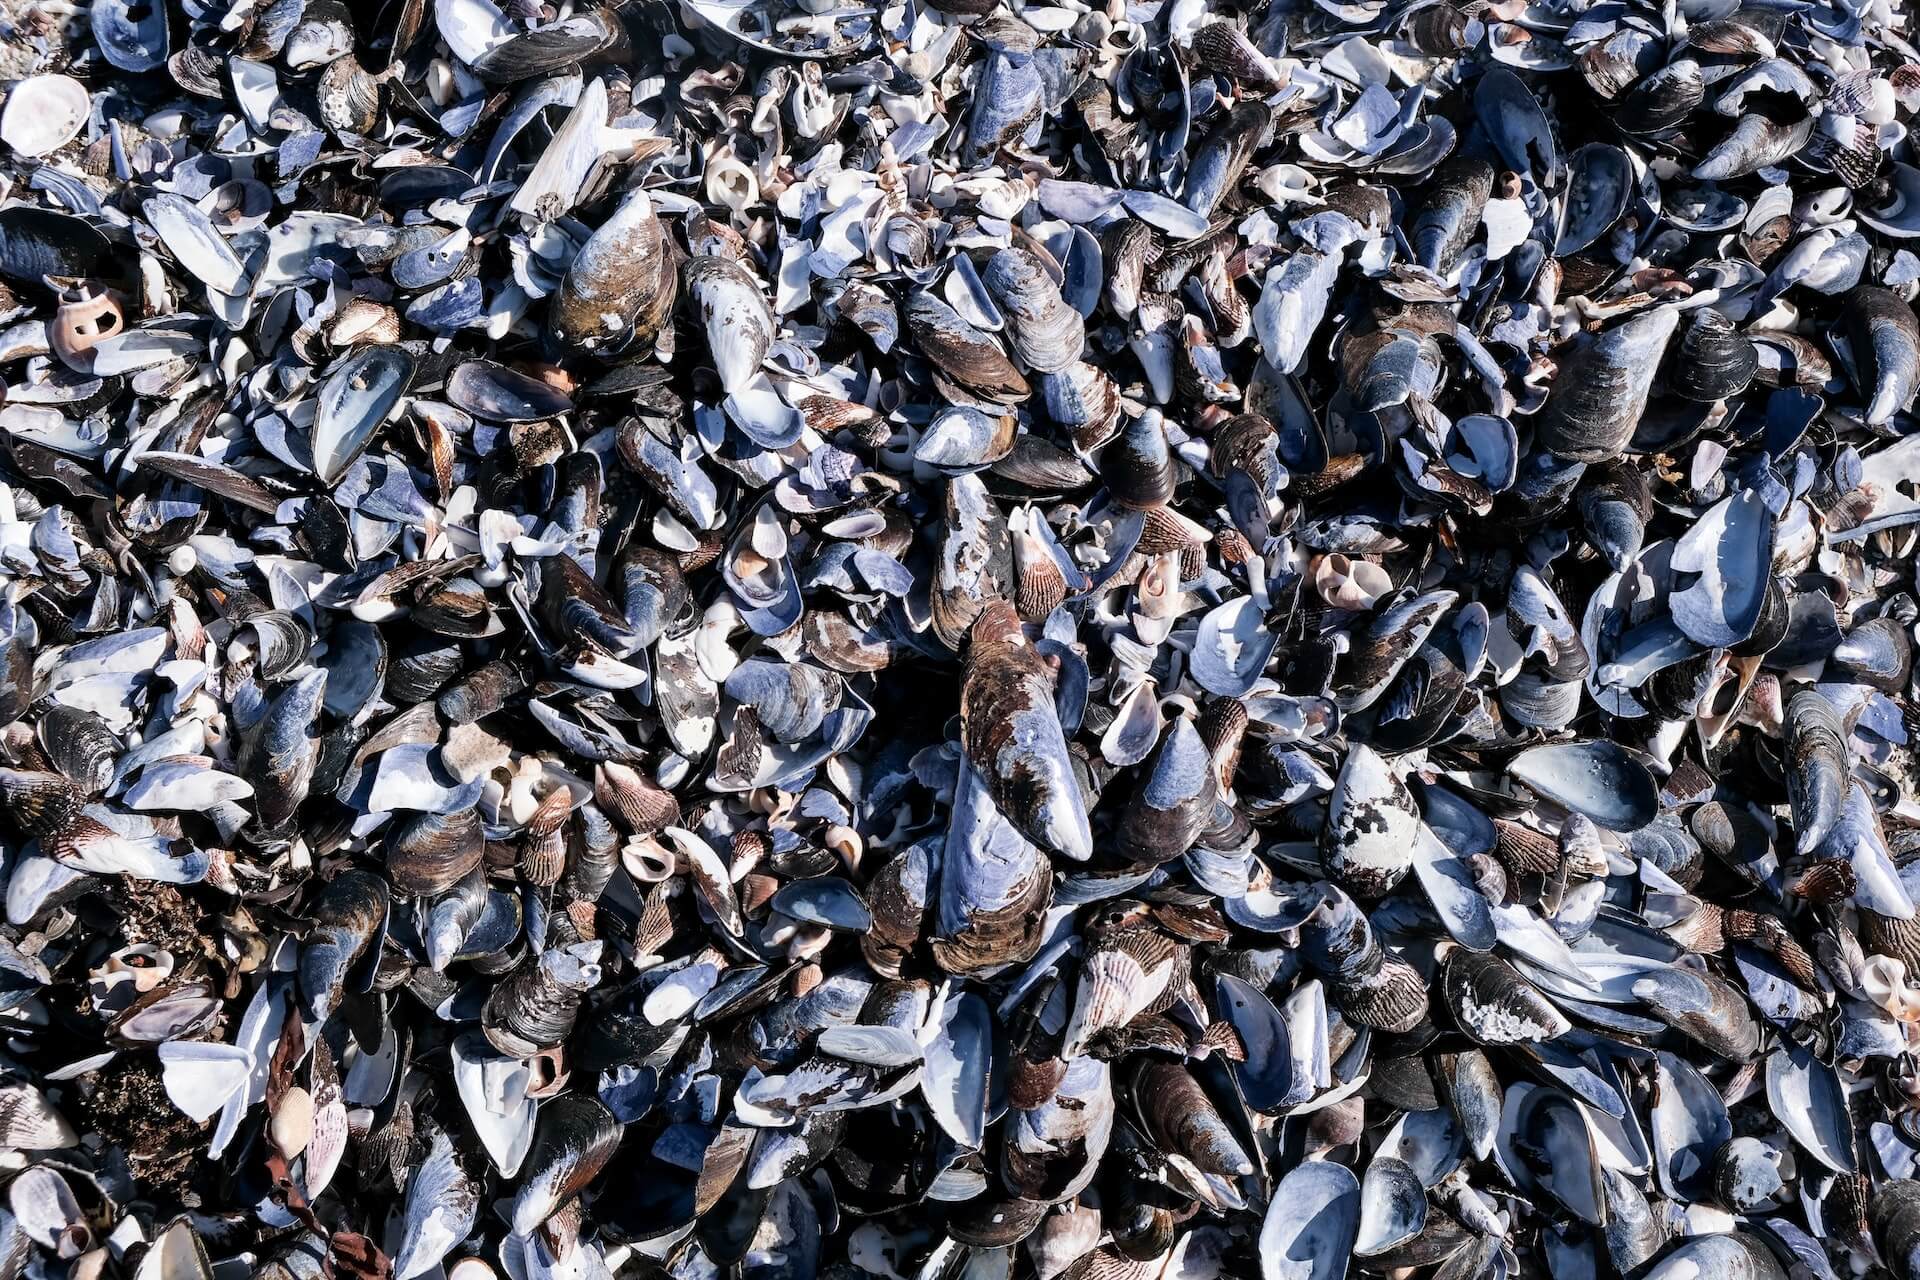 mussels stacked up